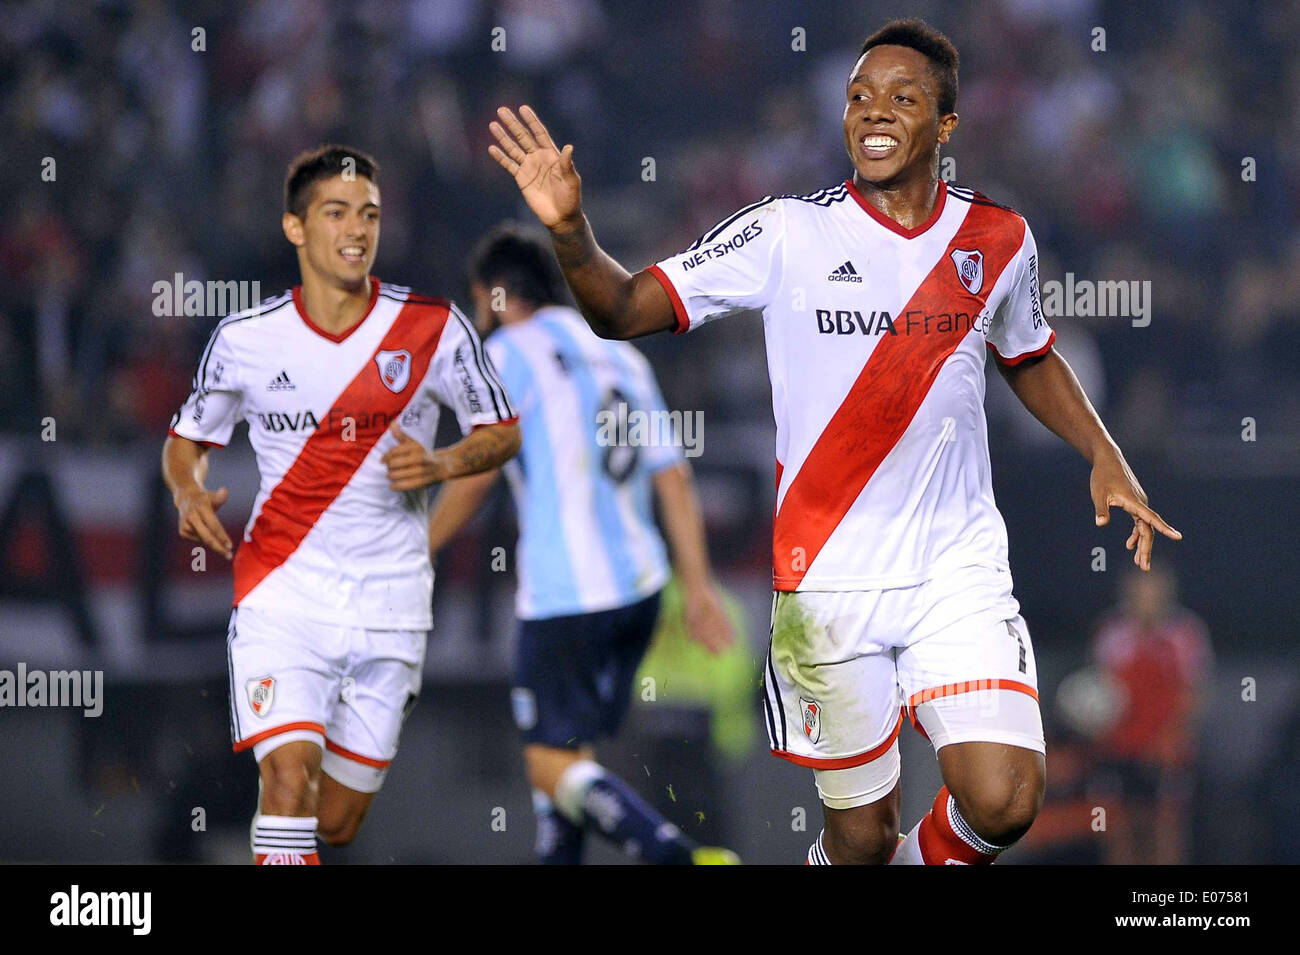 Buenos Aires, Argentina. 4th May, 2014. Carlos Carbonero (R) of River Plate celebrates during the match of the Final Tournament against Racing Club in the Monumental Stadium in Buenos Aires, capital of Argentina, on May 4, 2014. © Victor Carreira/TELAM/Xinhua/Alamy Live News Stock Photo